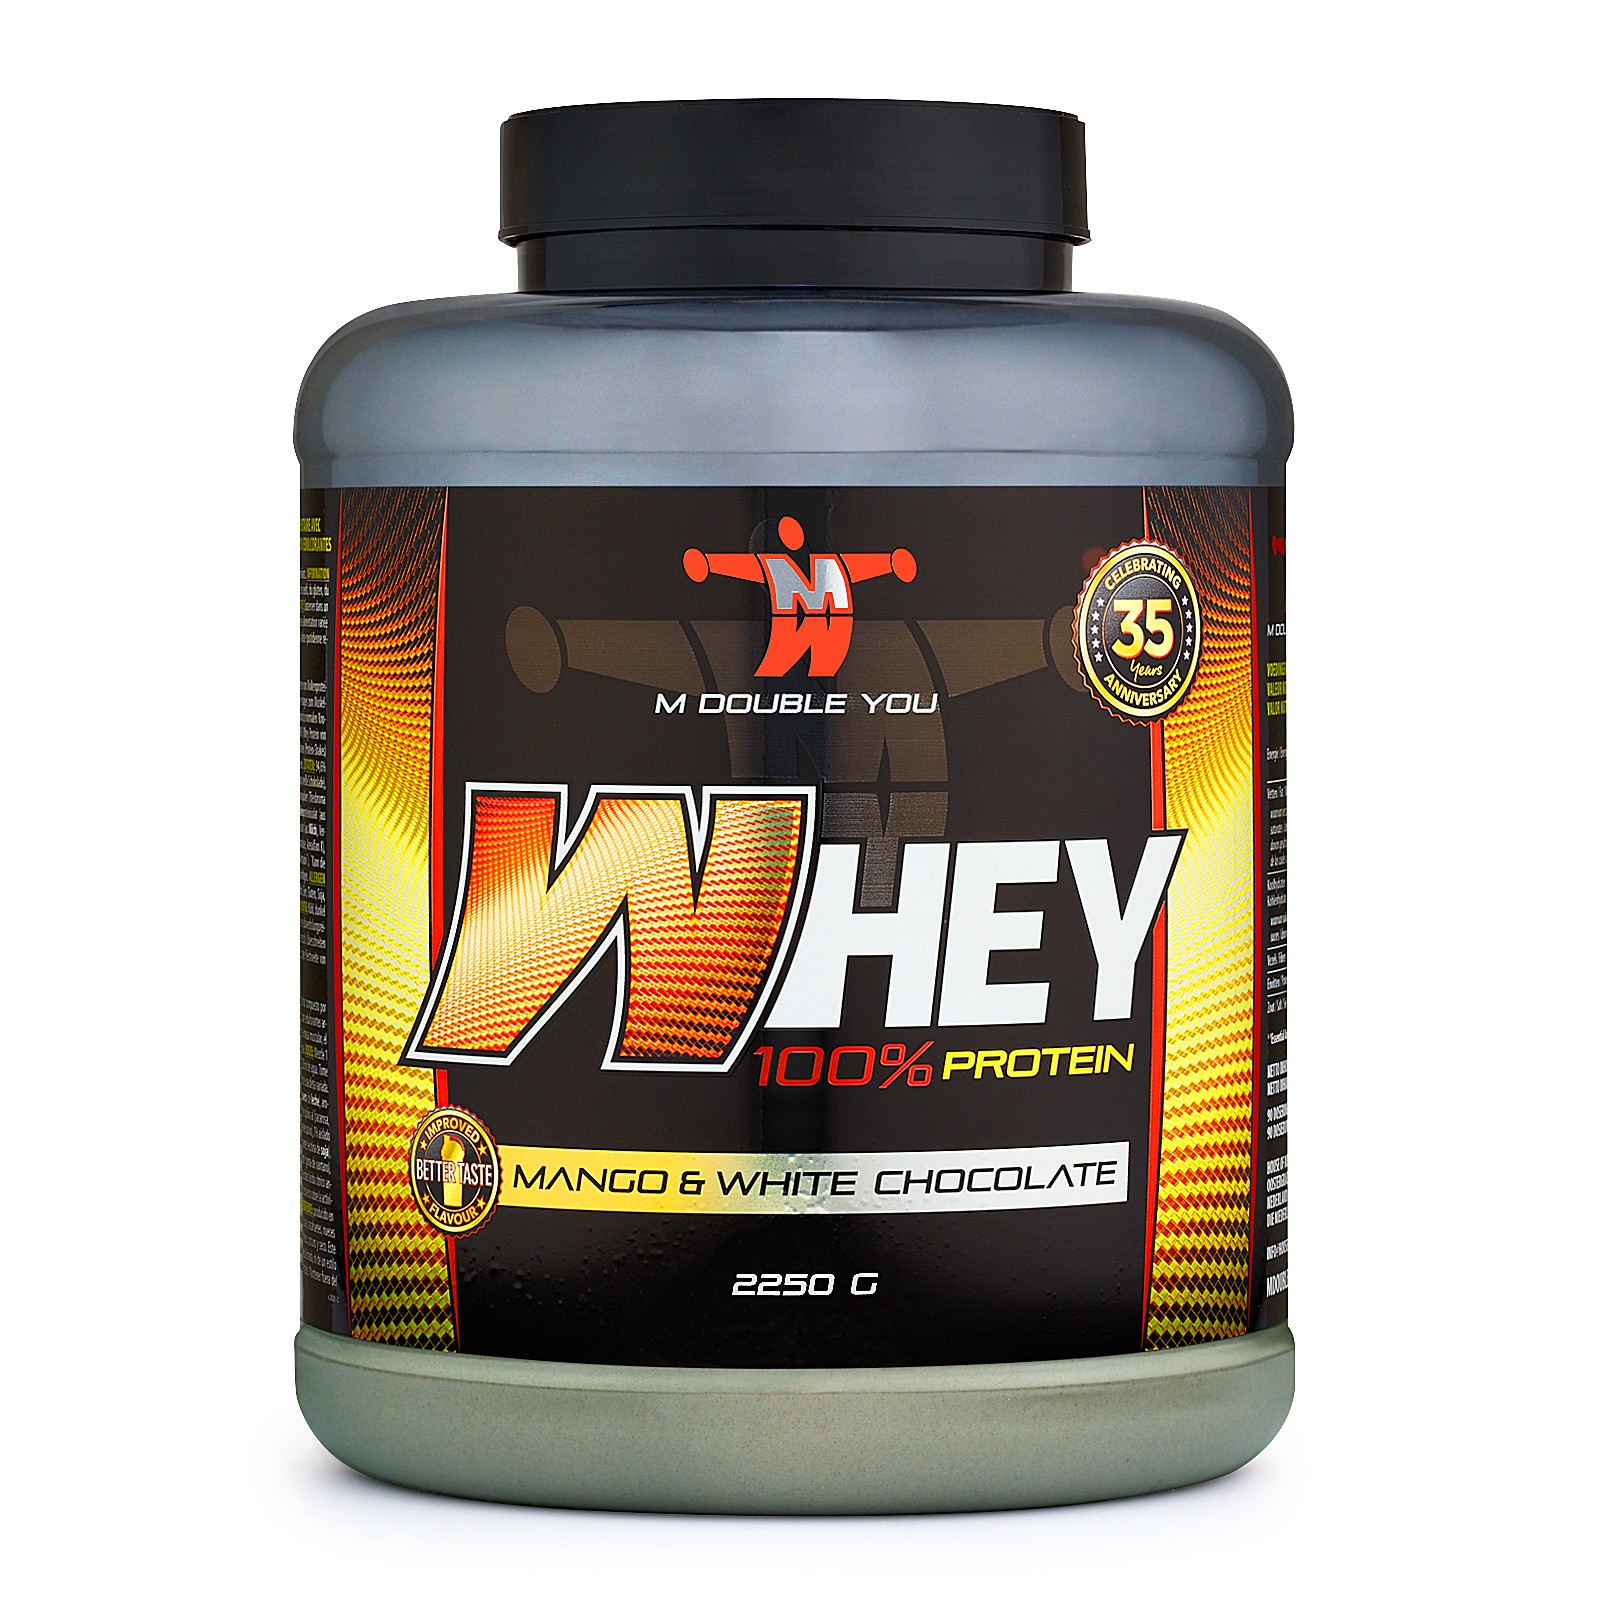 M DOUBLE YOU - 100% Whey Protein (Cookies/Cream - 2250 gram)